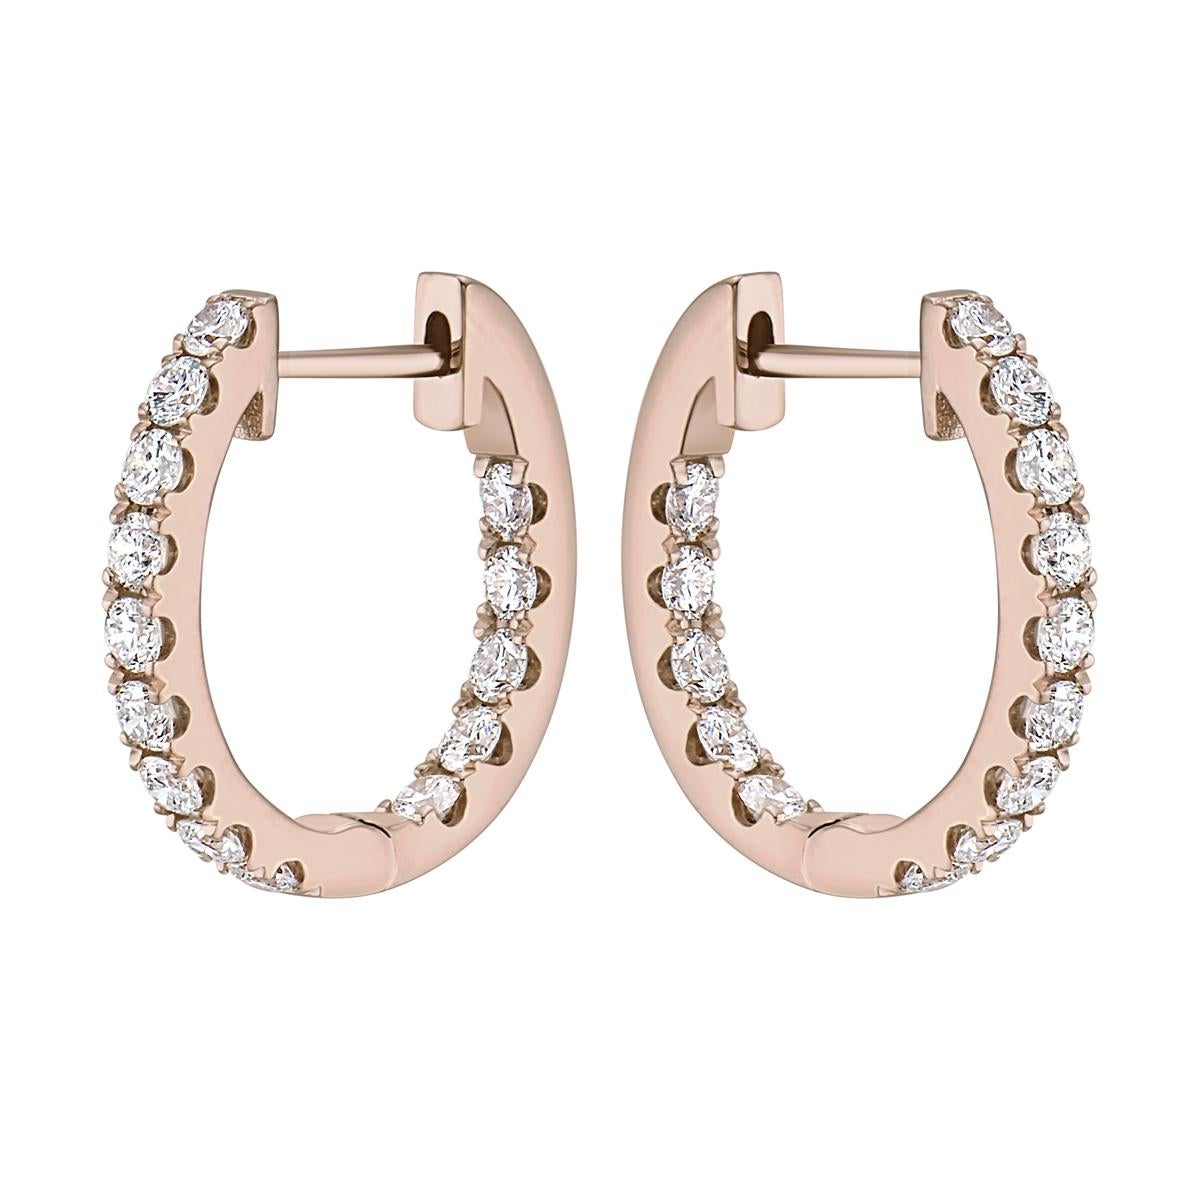 With these exquisite rose gold huggies hoop diamond earrings, style and glamour are in the spotlight. These rose gold hoop earrings are set in 14-karat gold and made from 4.2 grams of gold. The color of the diamonds is GH. The clarity is SI1. These